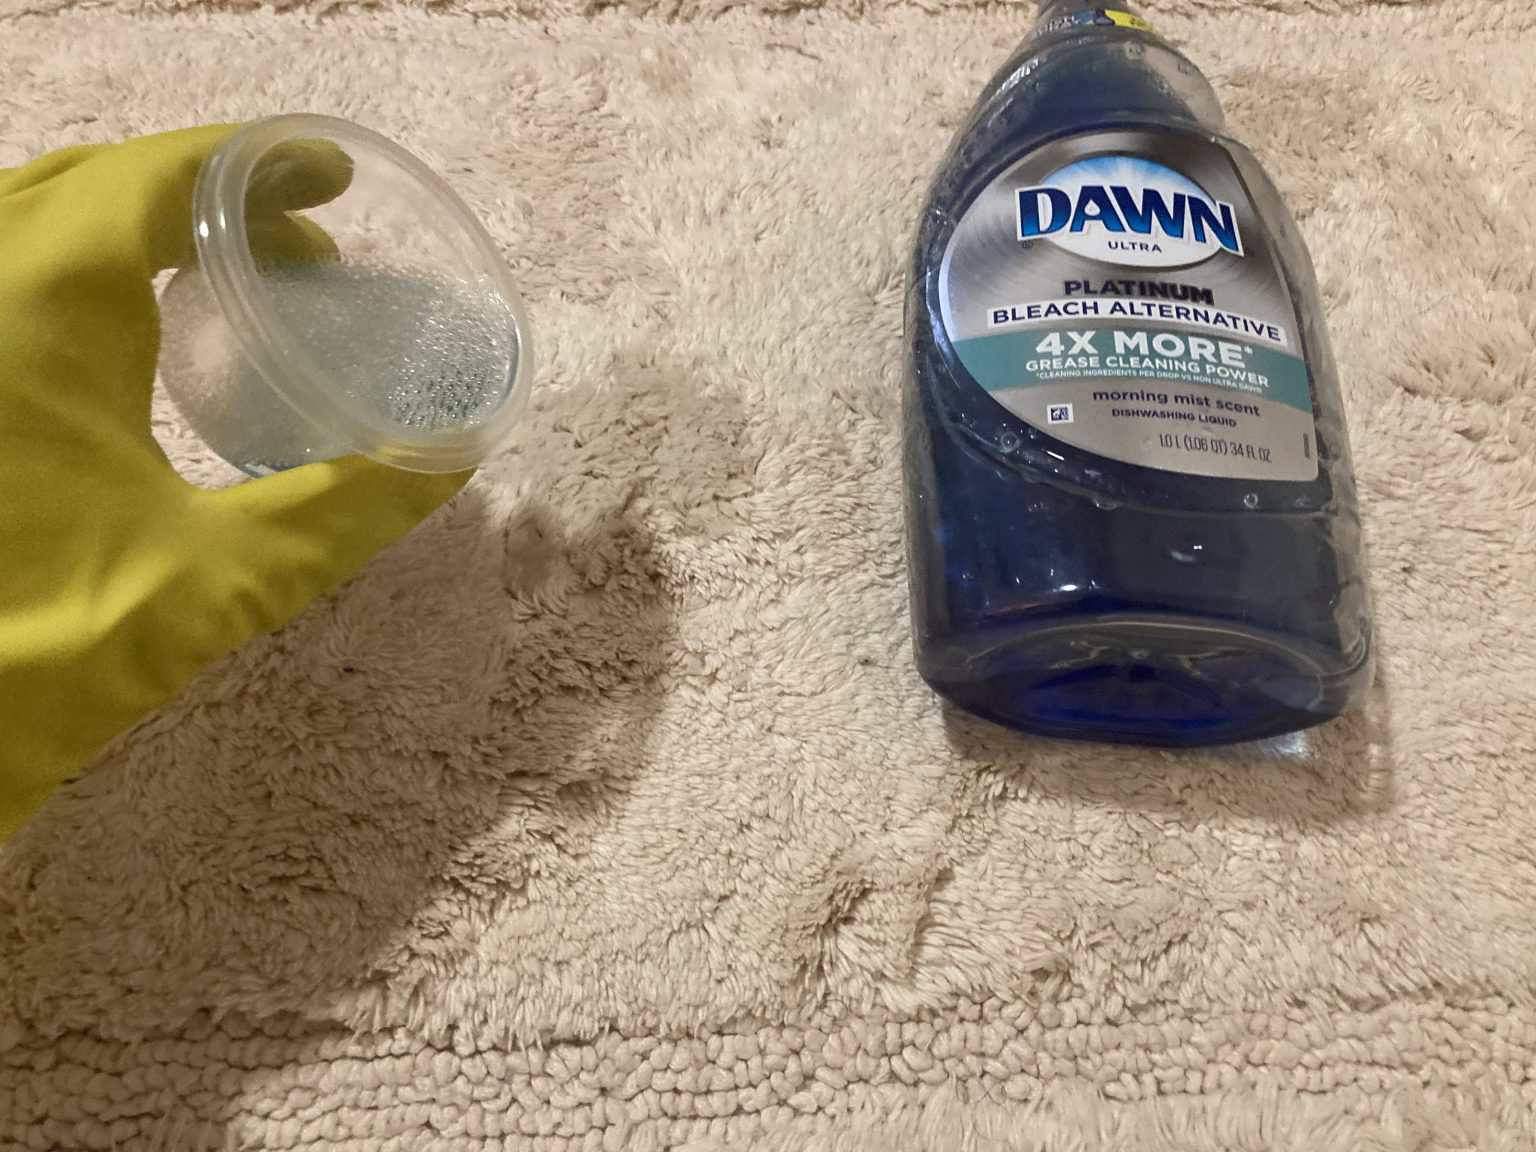 7 INTERESTING DAWN DISH SOAP HACKS AND USES – Notes From The Porch